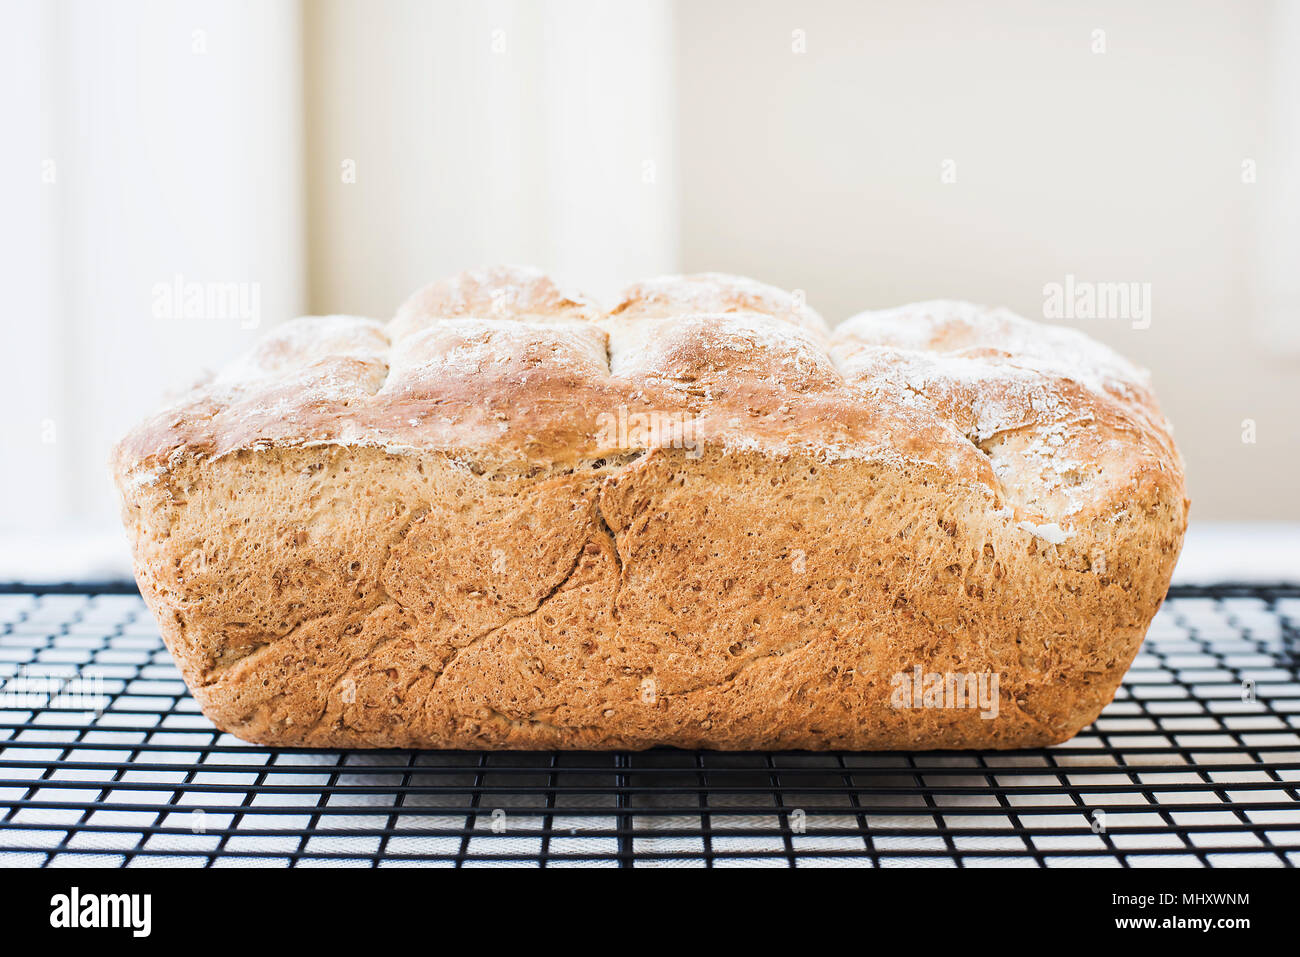 Freshly baked loaf of whole wheat bread on cooling rack Stock Photo